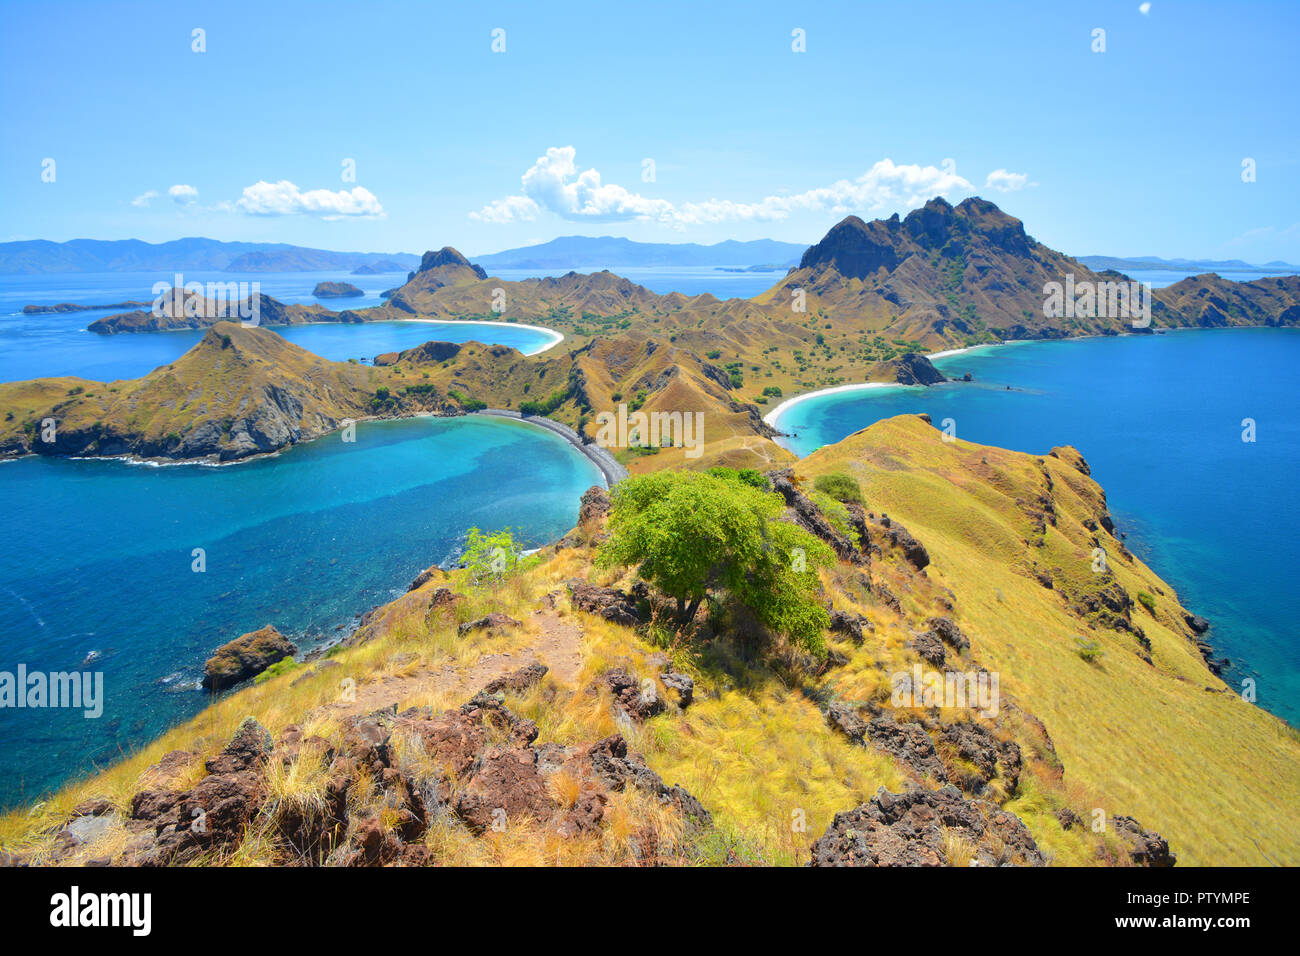 Padar Island near Komodo Island, Indonesia. Beautiful paradise island hiking to the top and seeing the view all over the bays of the island in archipe Stock Photo